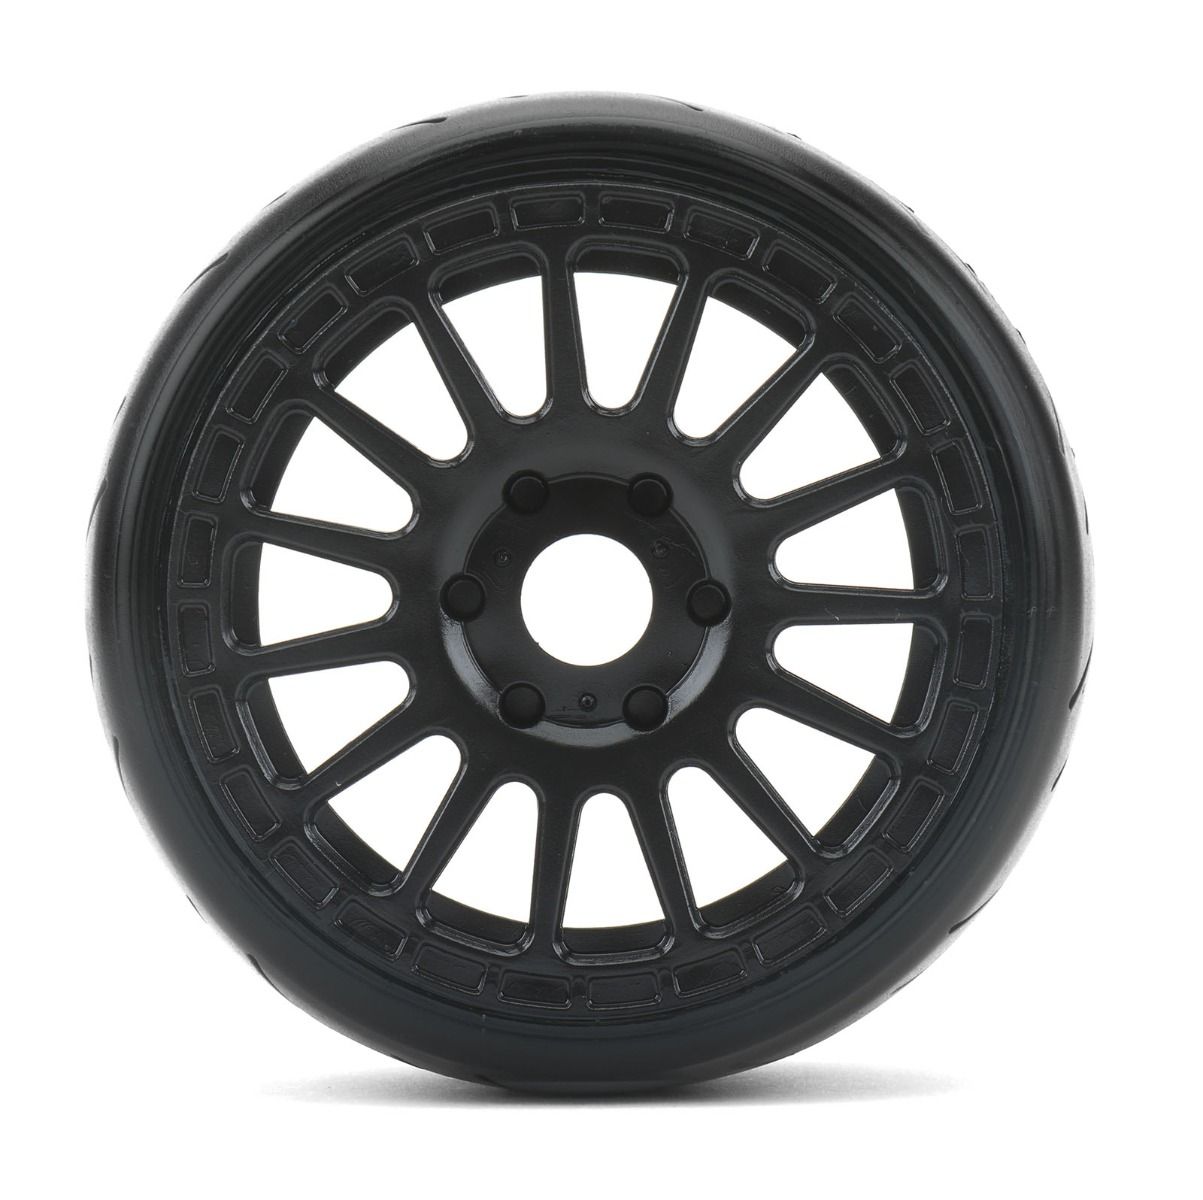 Powerhobby 1/8 GT Atomic Belted Pre-Mounted Tires 17mm Soft Compound - PowerHobby